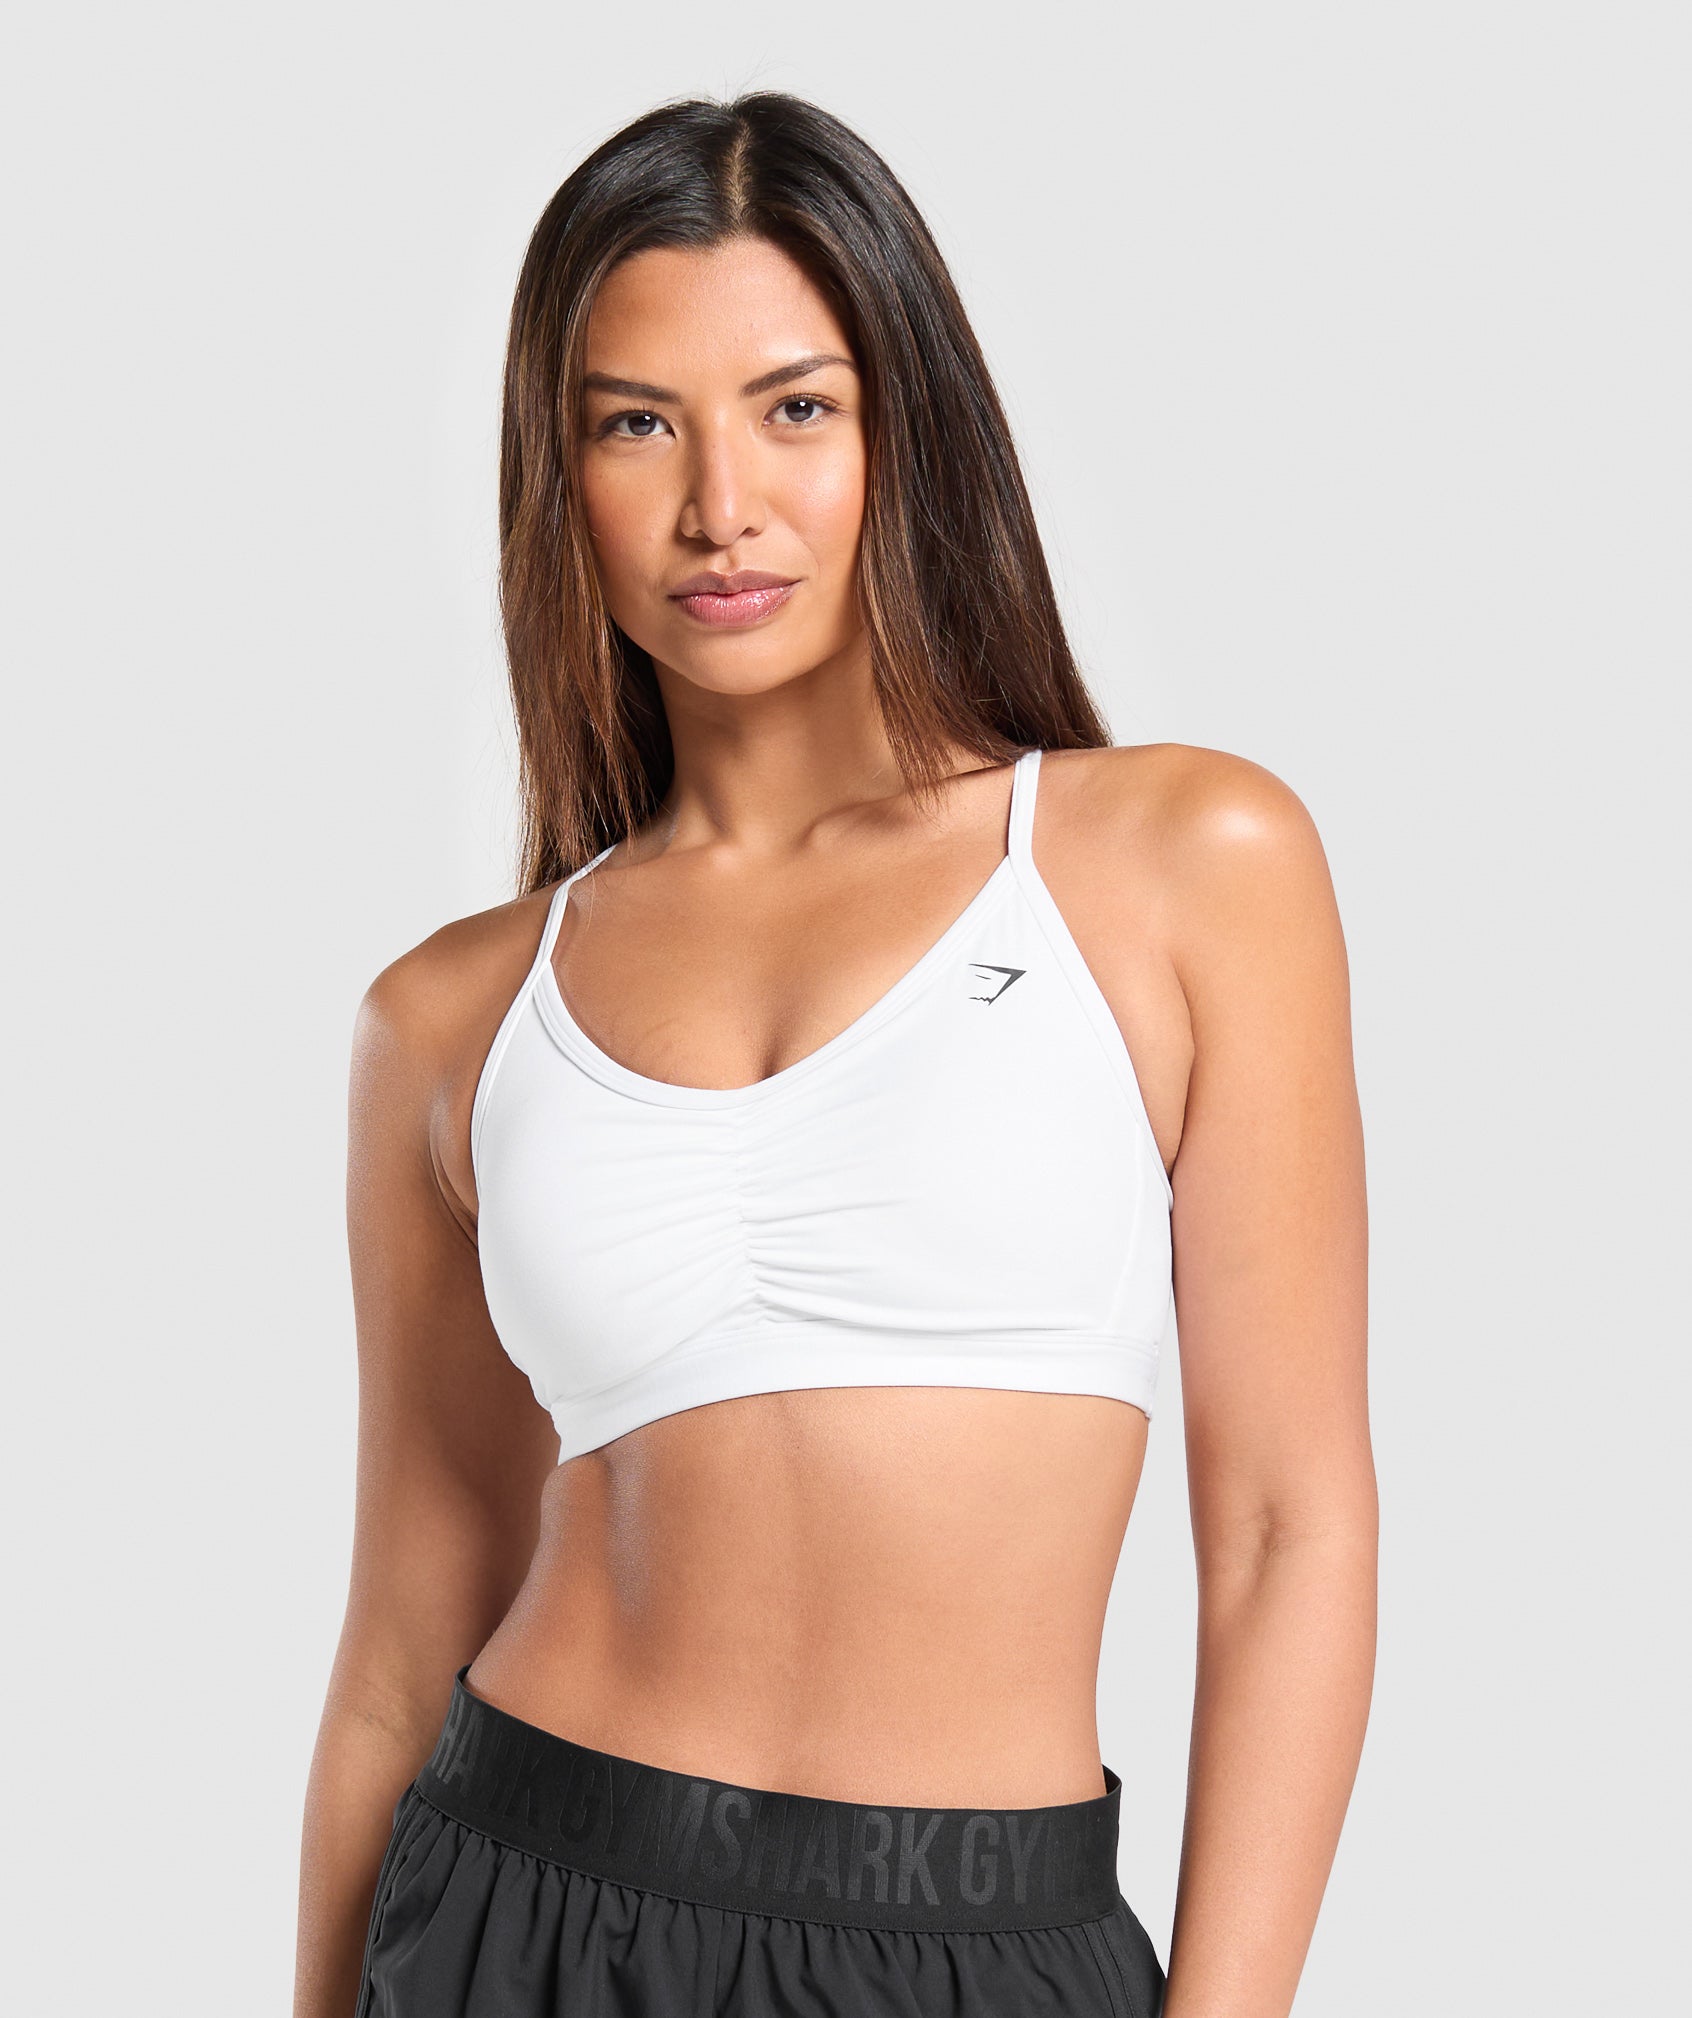 Ruched Sports Bra in White is out of stock